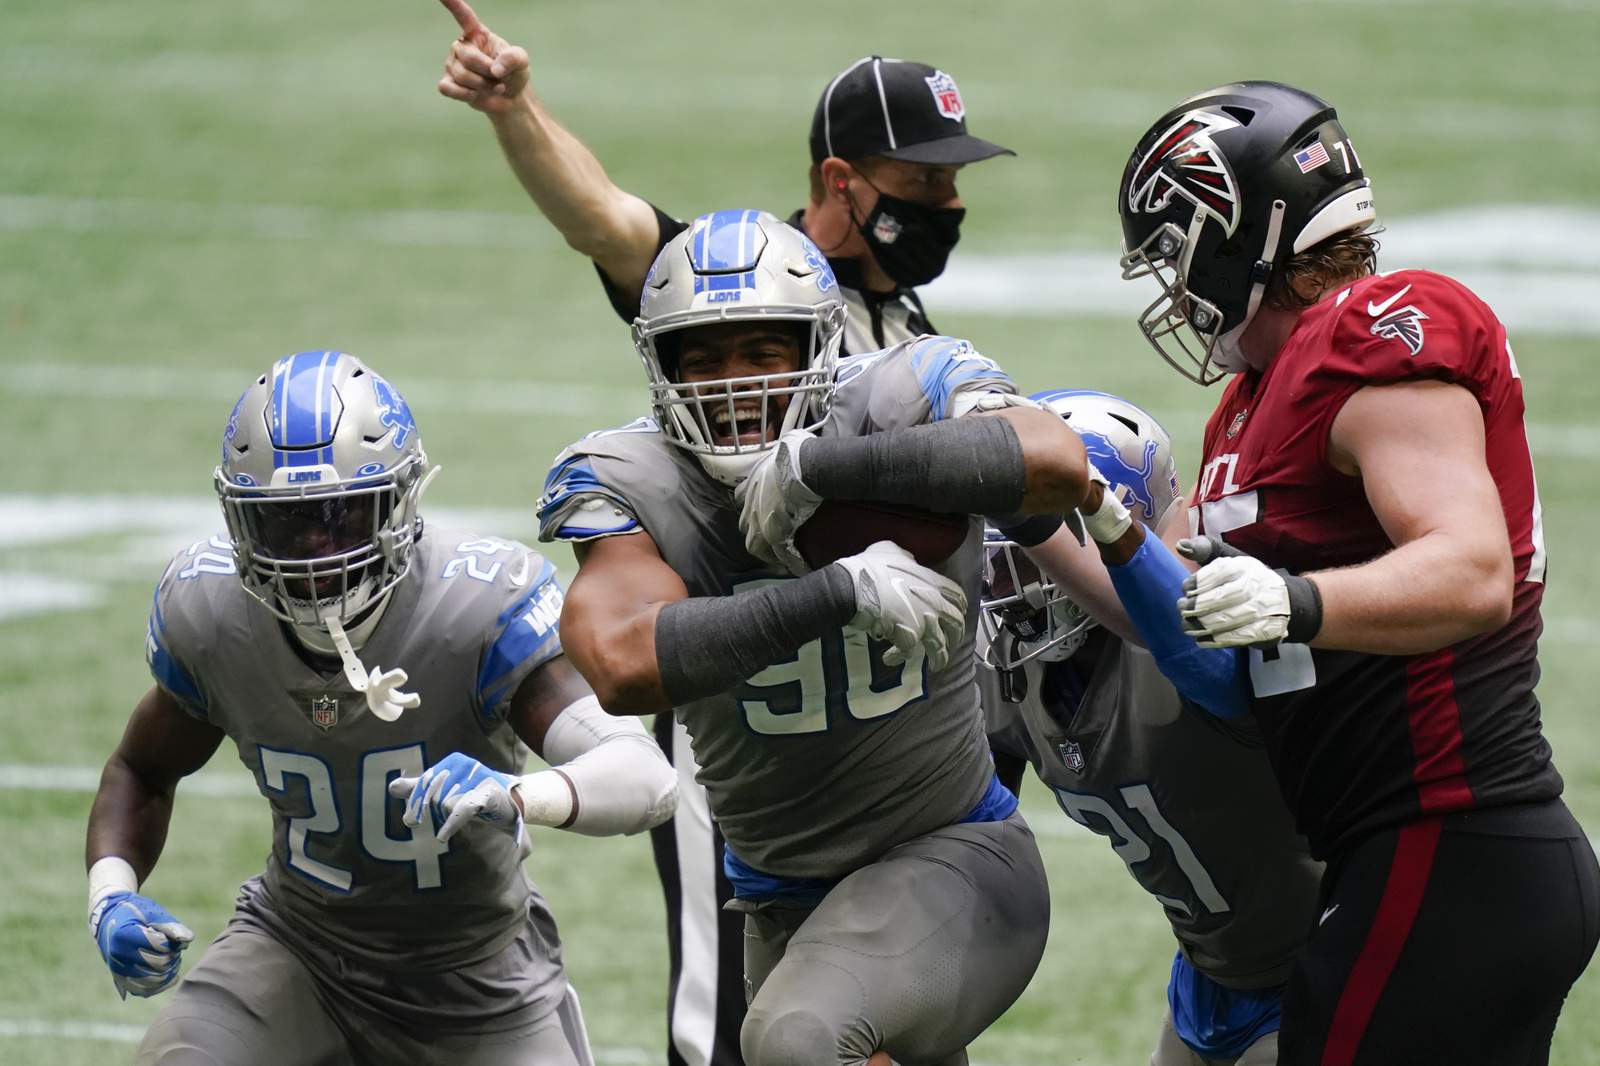 Lions stun Falcons 23-22 after letting Atlanta score late TD